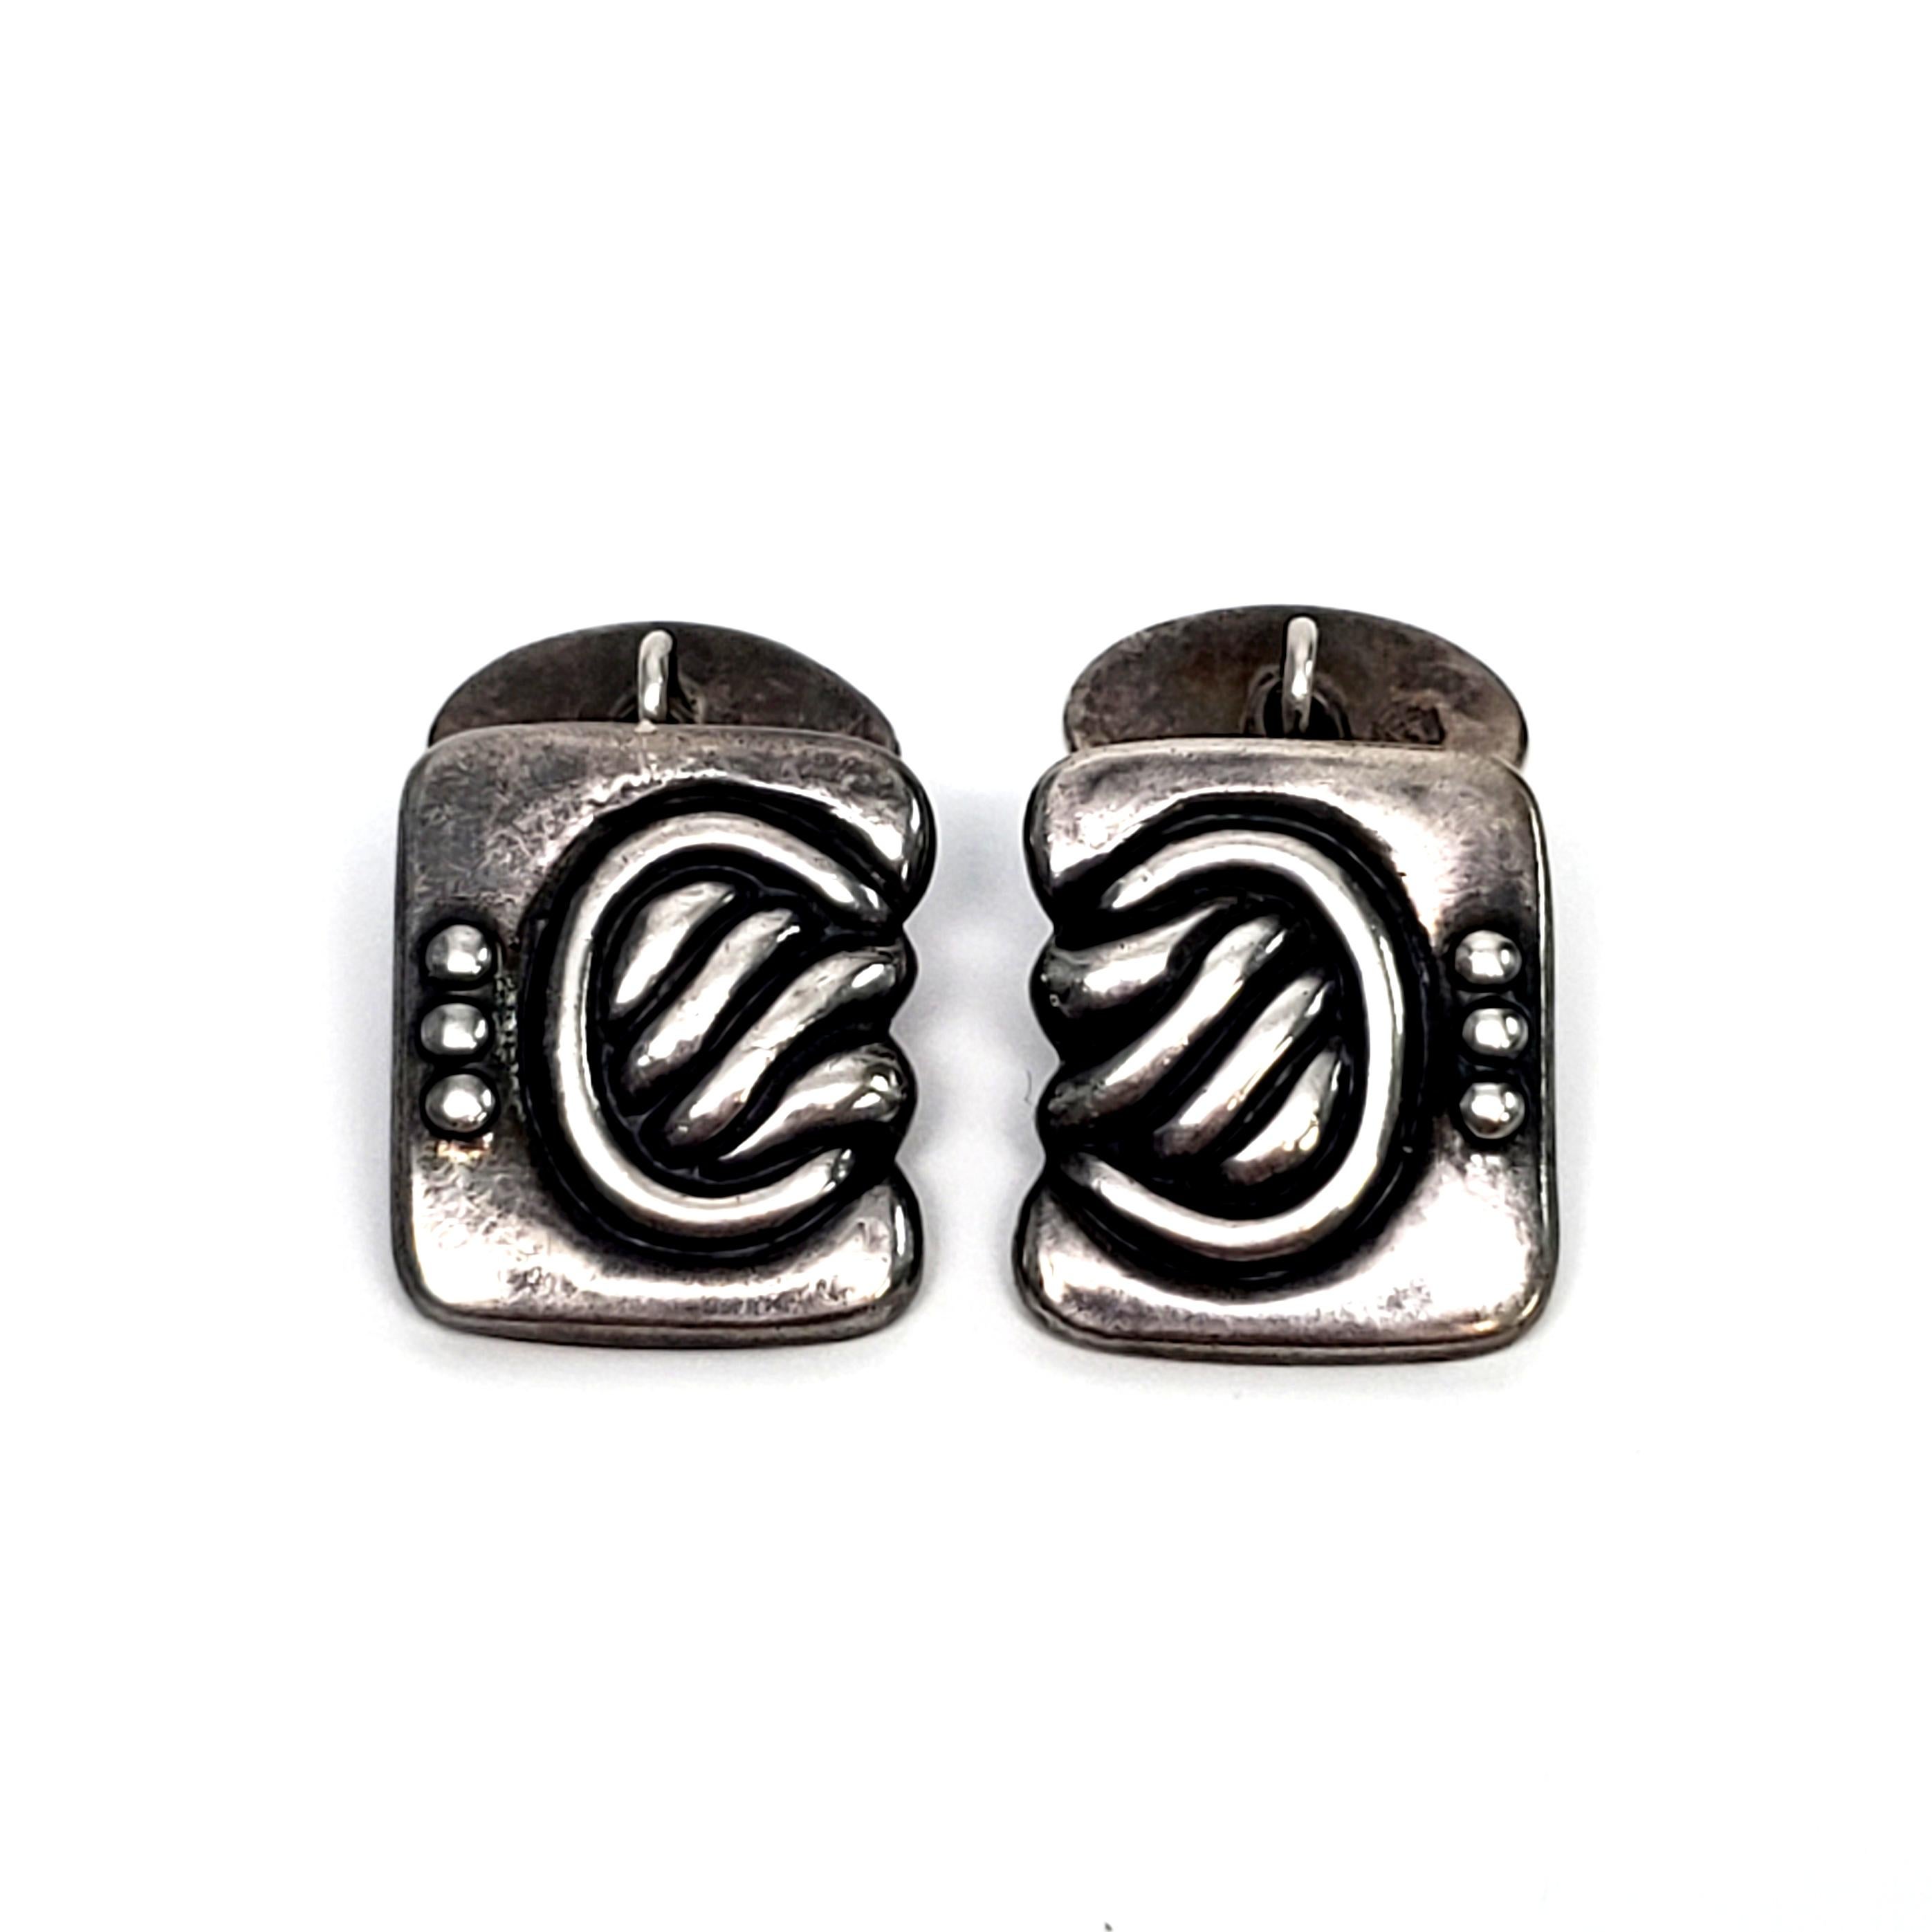 Vintage Los Castillo of Taxco, Mexico sterling silver cufflinks, design #897. Circa 1940s.

Los Castillo is a renowned and influential Taxco workshop producing pieces of high quality design and craftsmanship. Los Castillo pieces are highly